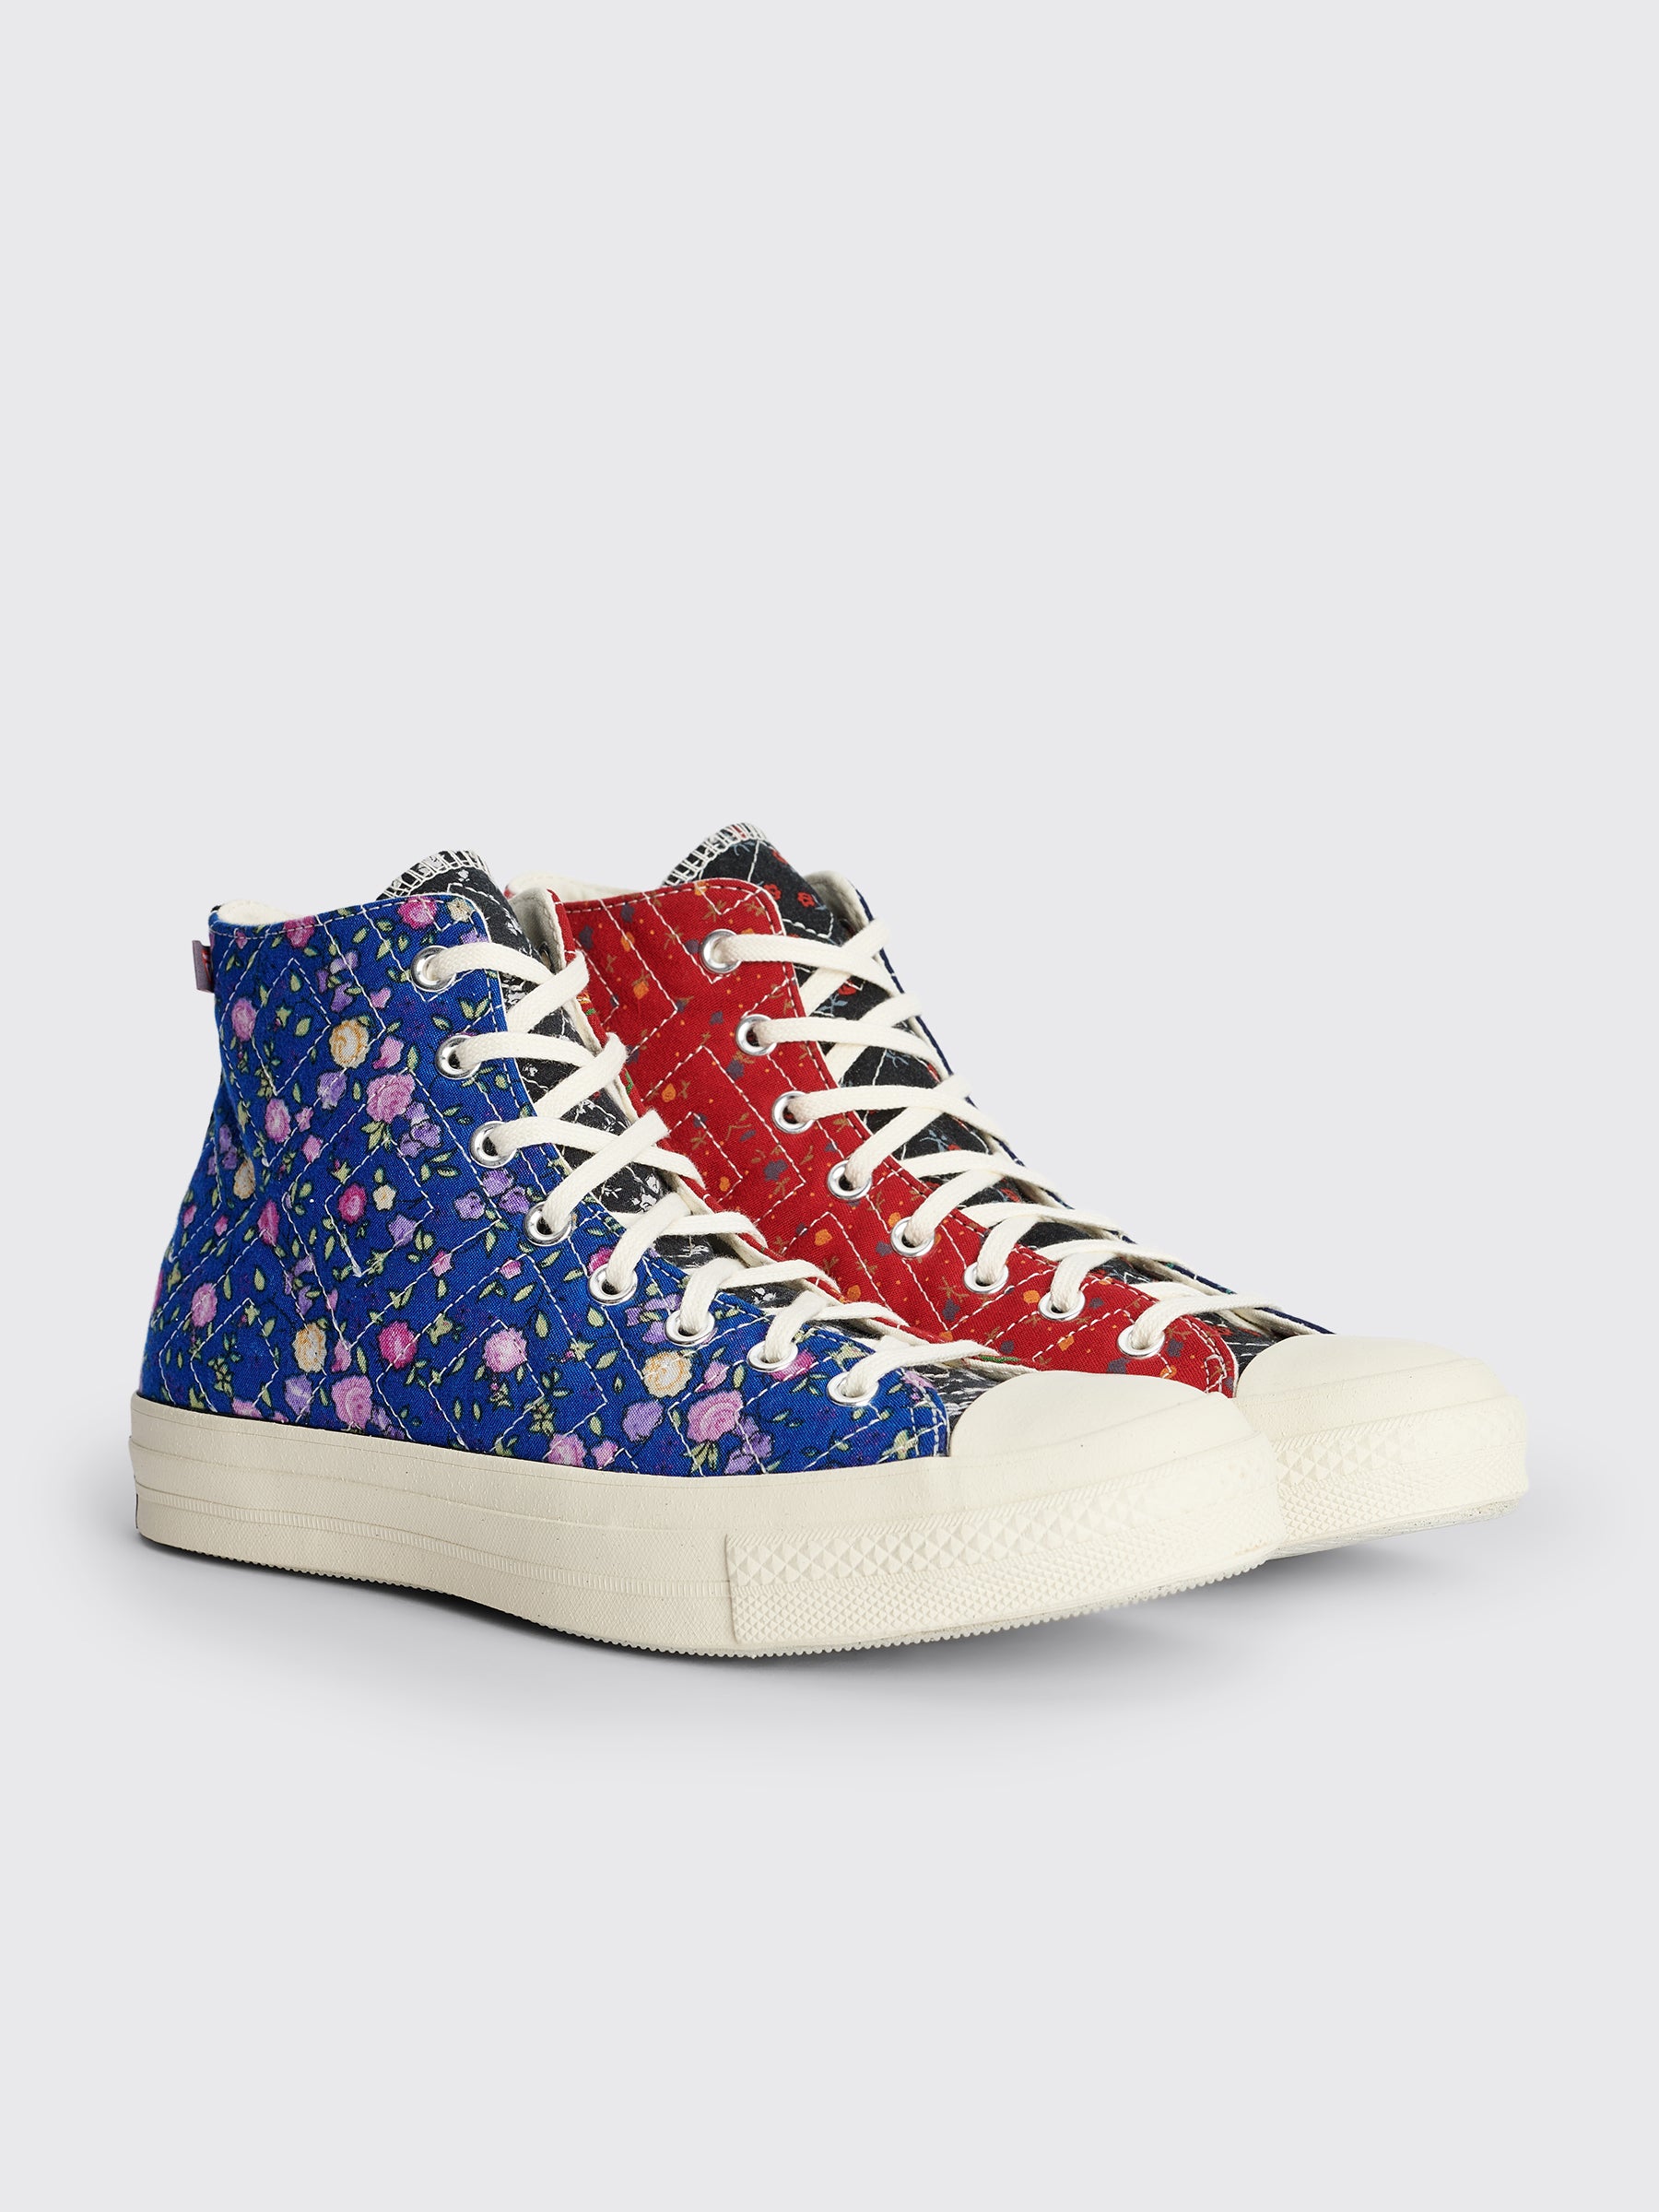 Converse x Beyond Retro Upcycled Floral Chuck 70 Hi Black / Red / Blue